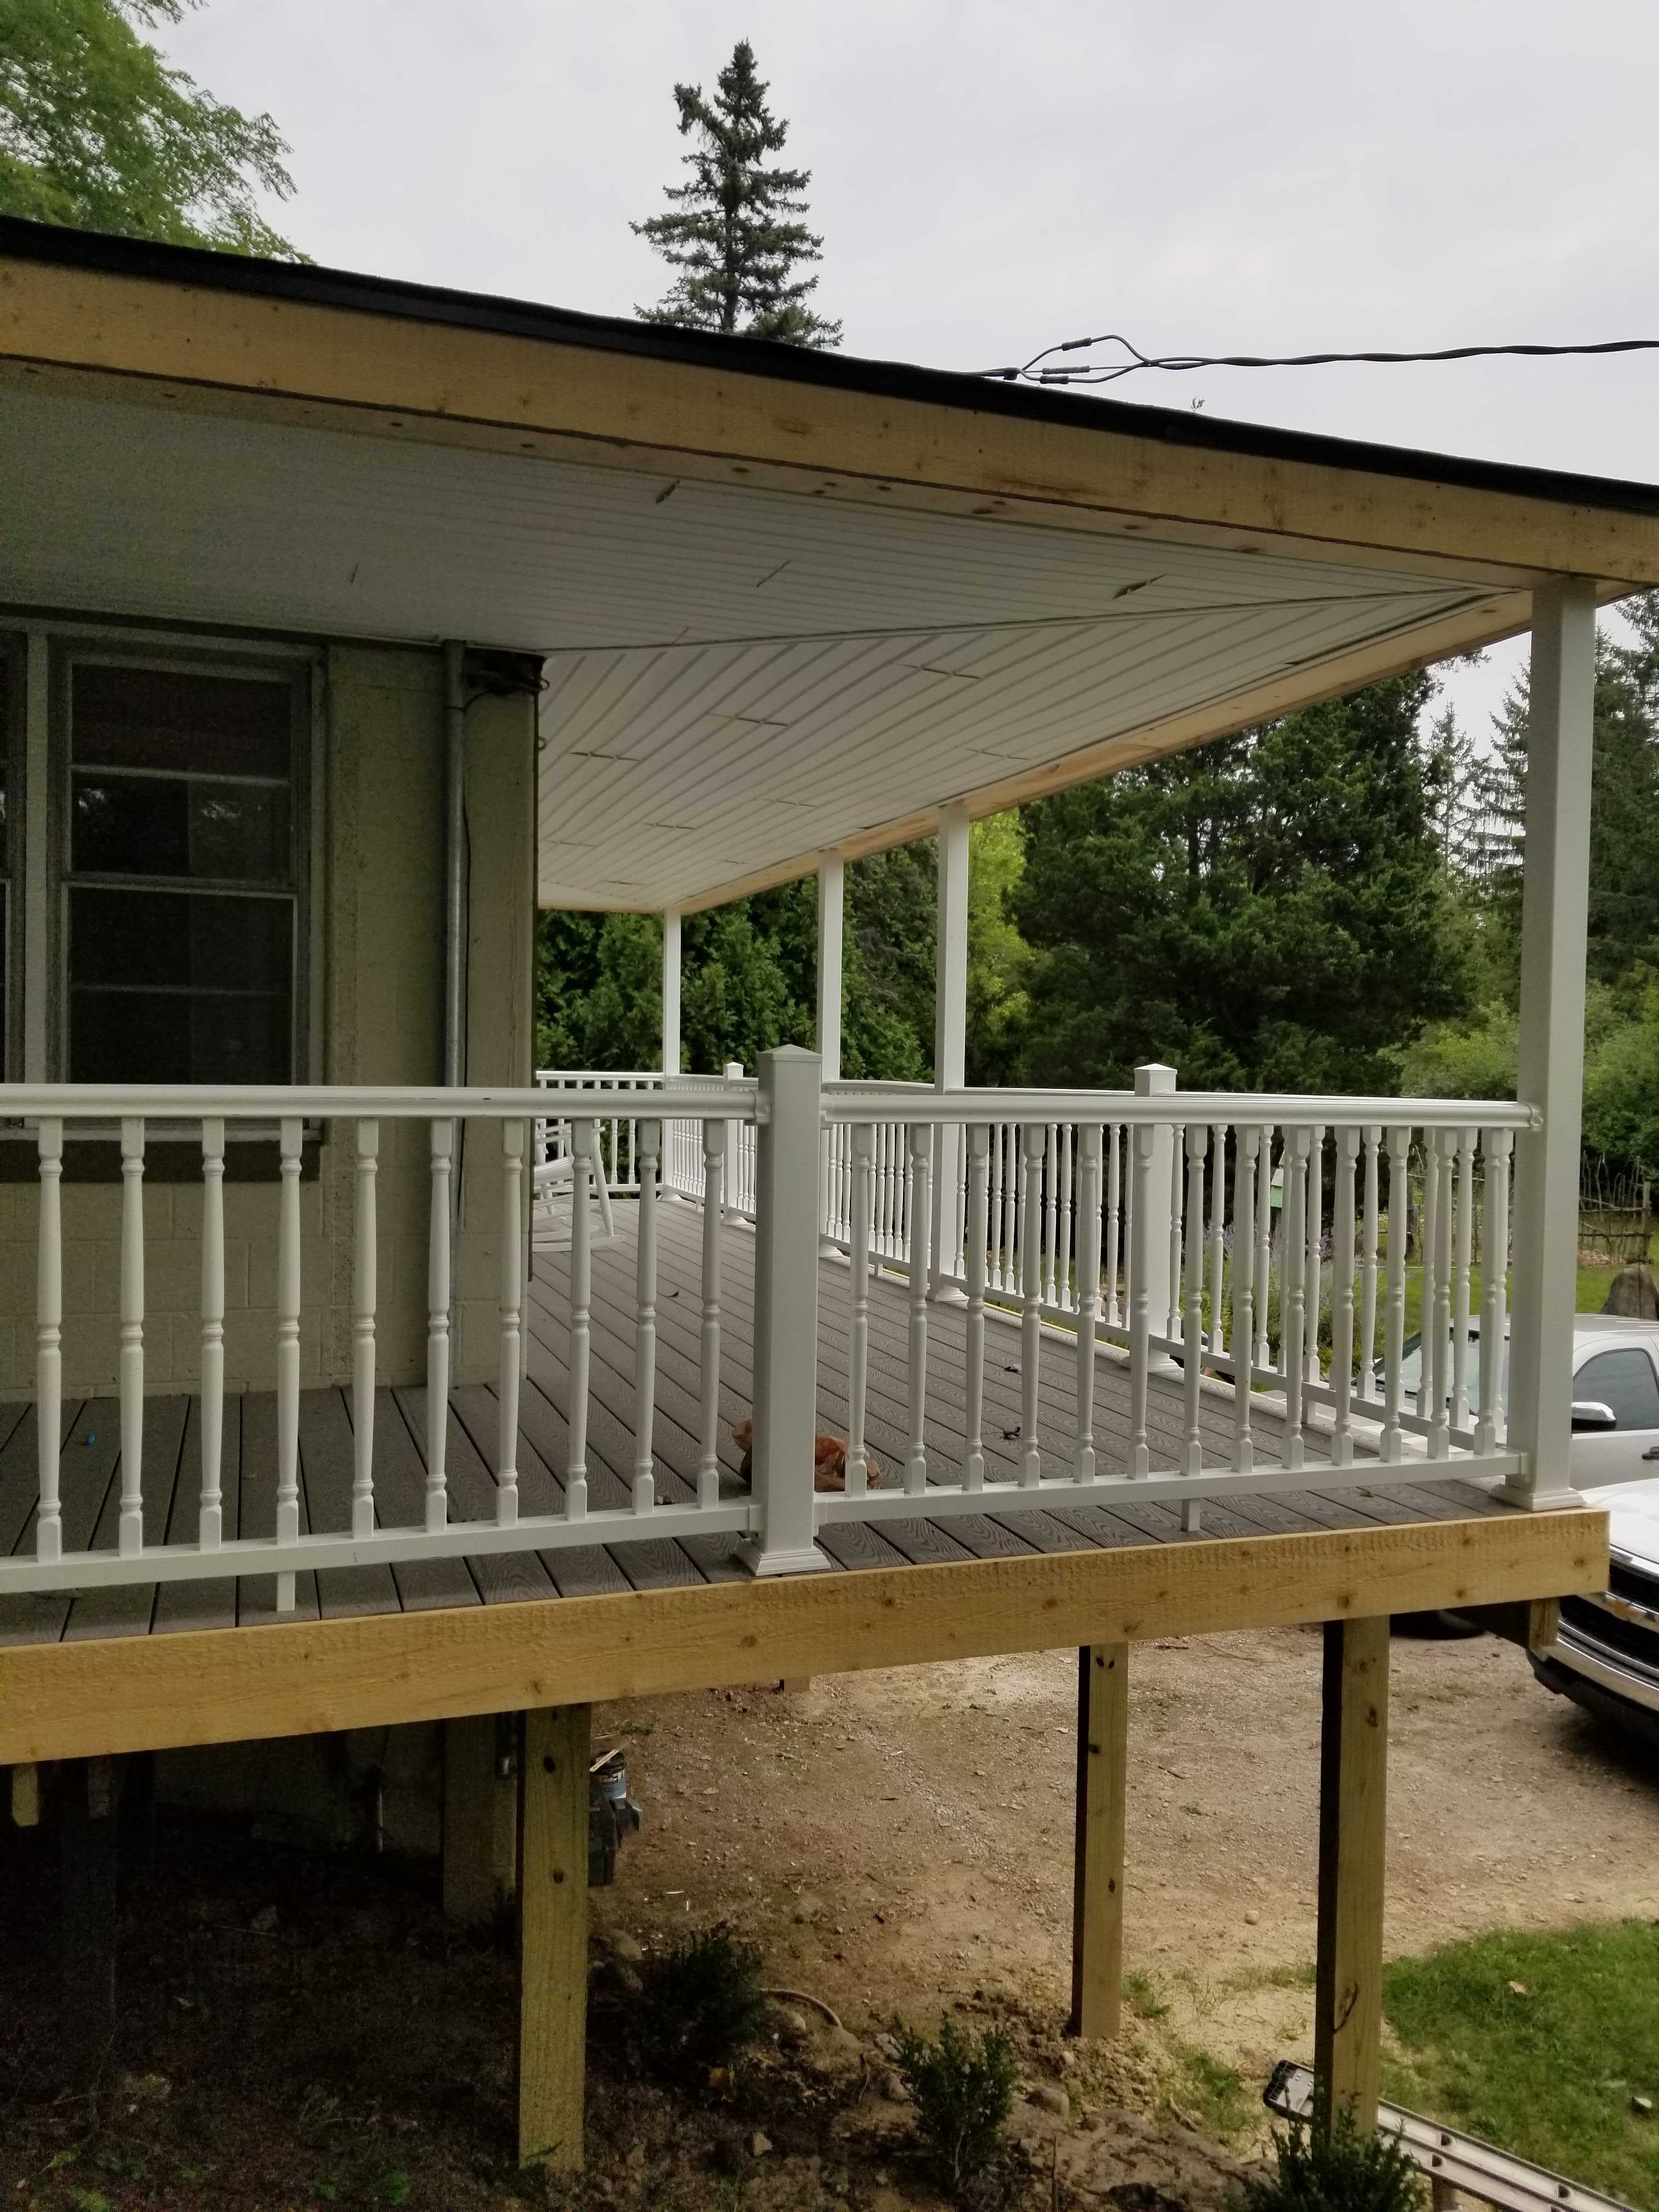 A custom raised deck on the second story of a hillside house with roofing and awning.